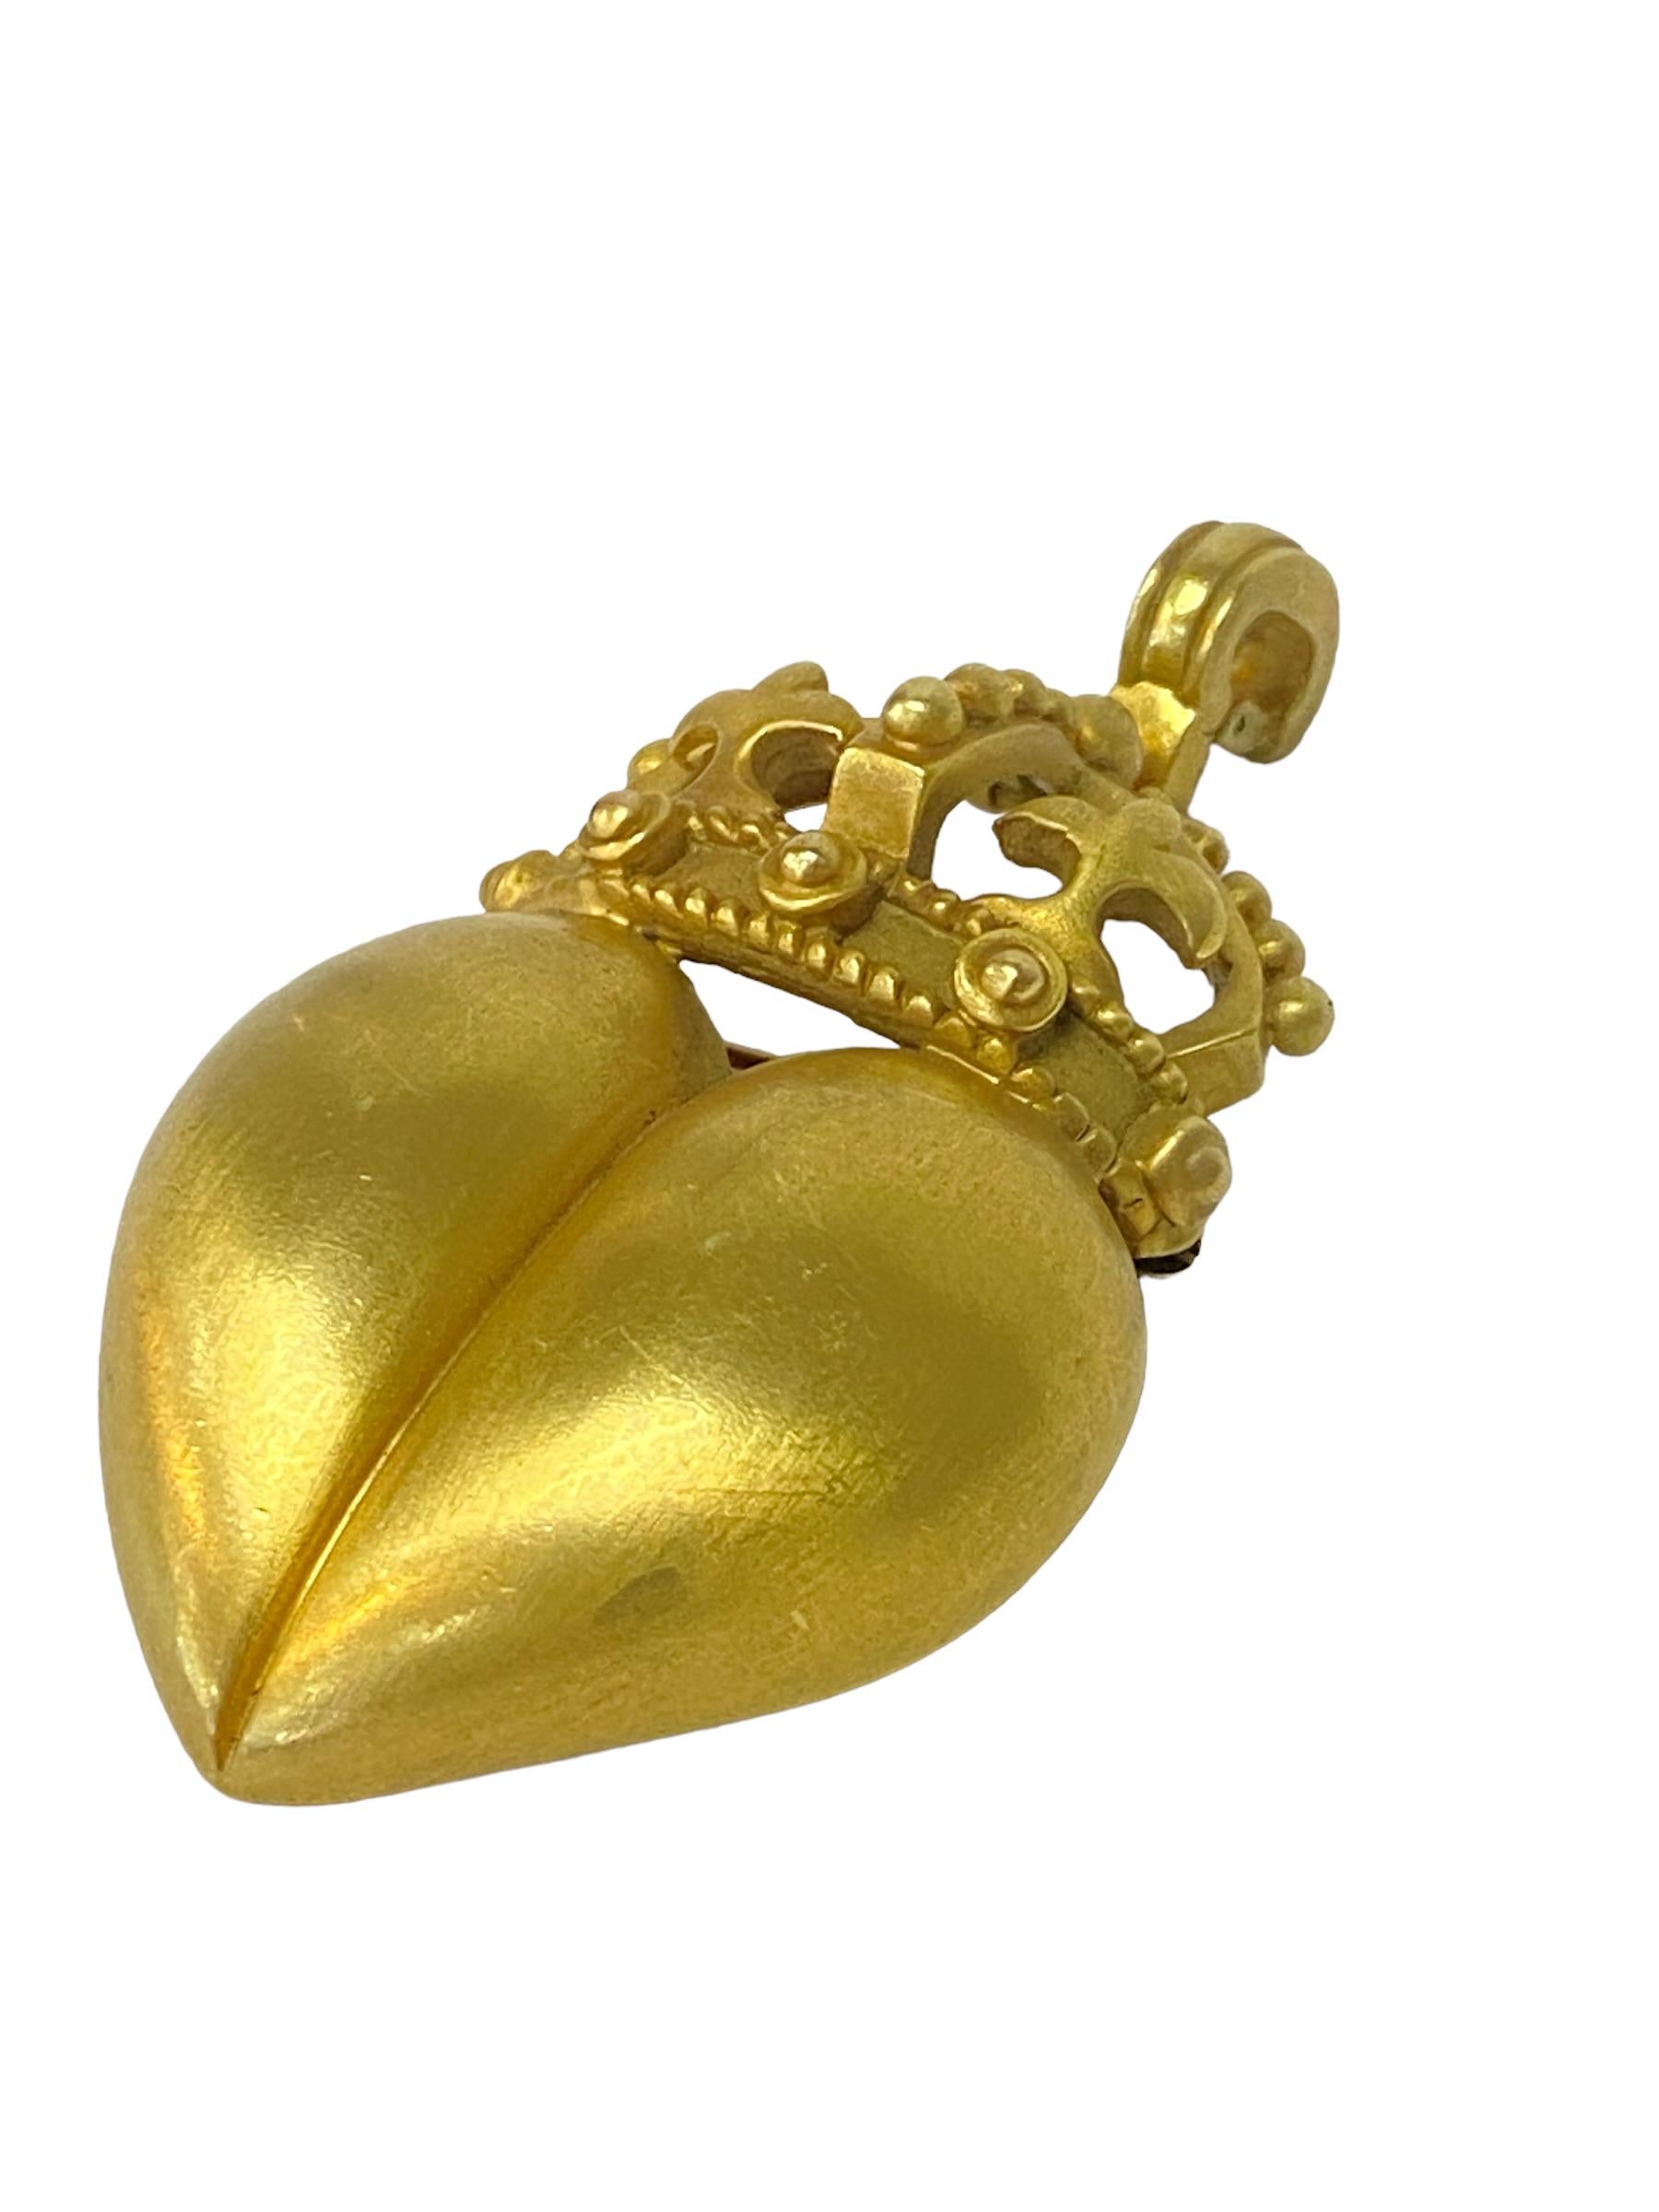 Large, 1987 Barry Kieselstein Cord 18K Yellow Gold Crowned Heart Pin Pendant 
Measurements of the pendant are 2-1/2 inches long x 1-1/4 inches wide
Hallmarked on the inside edge of the heart: Kieselstein 1987 18kt
The backside gives an optional Pin